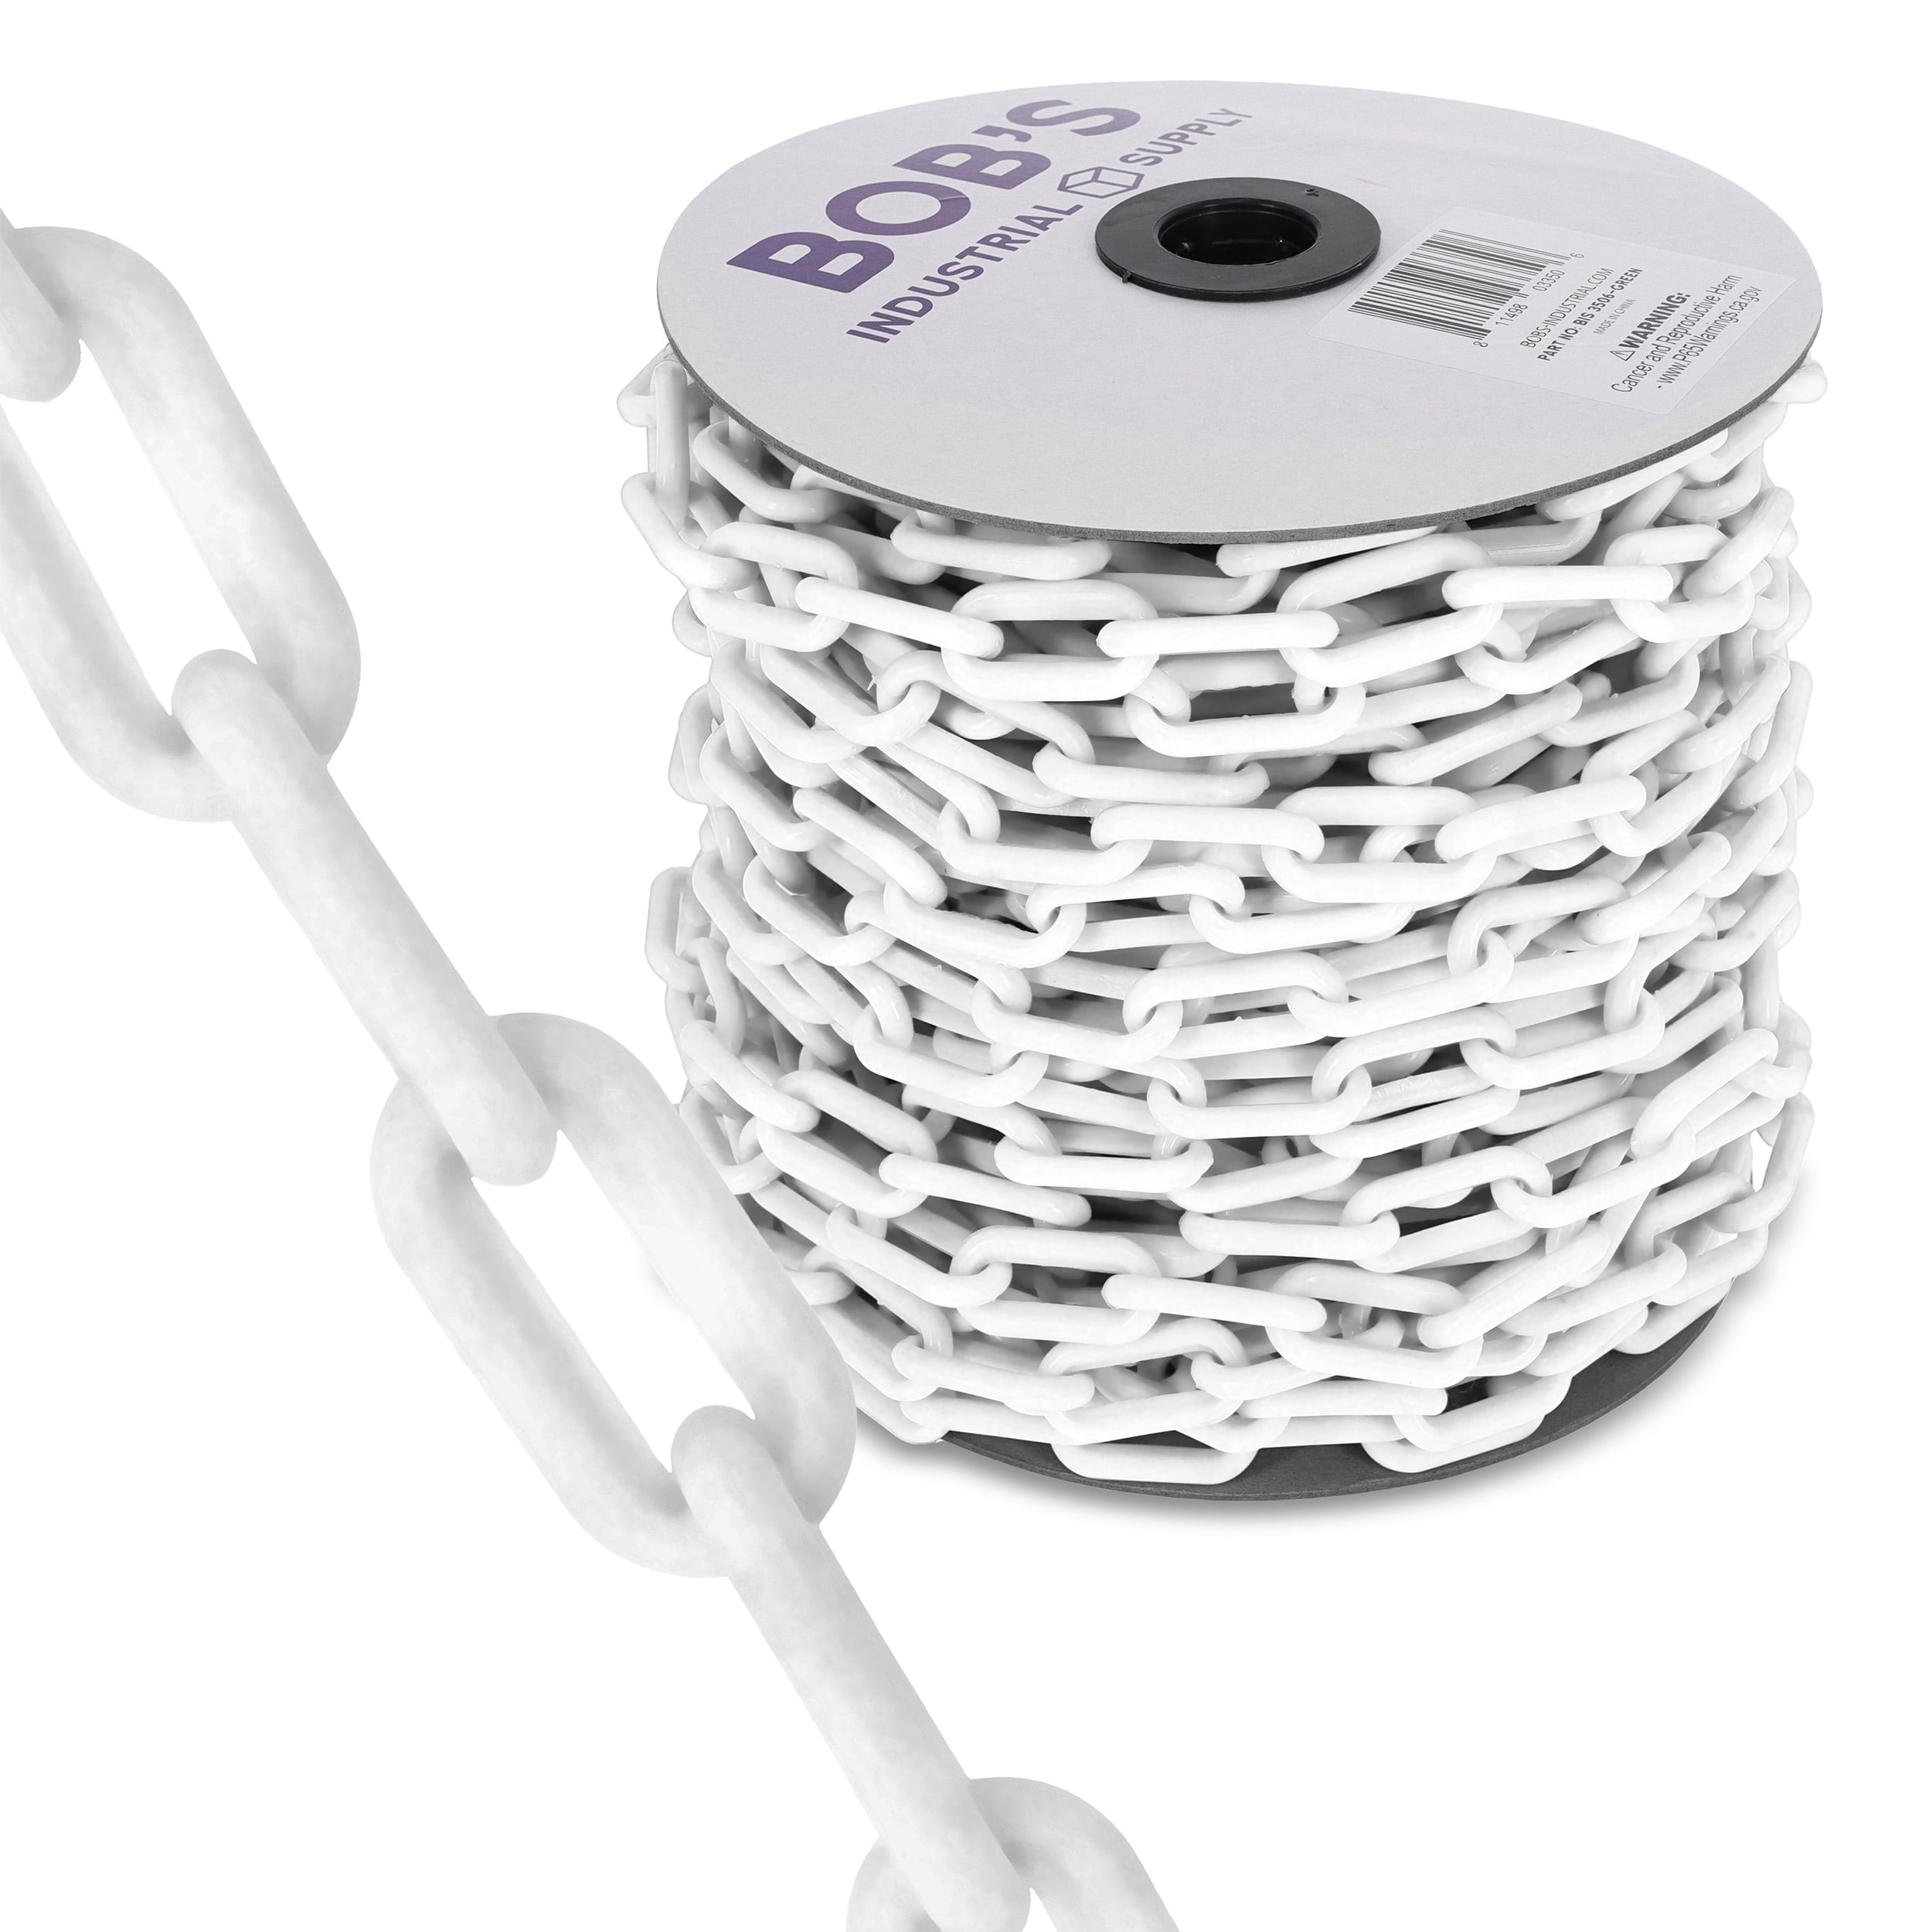 White Opaque Assorted Plastic Open Links (3oz)